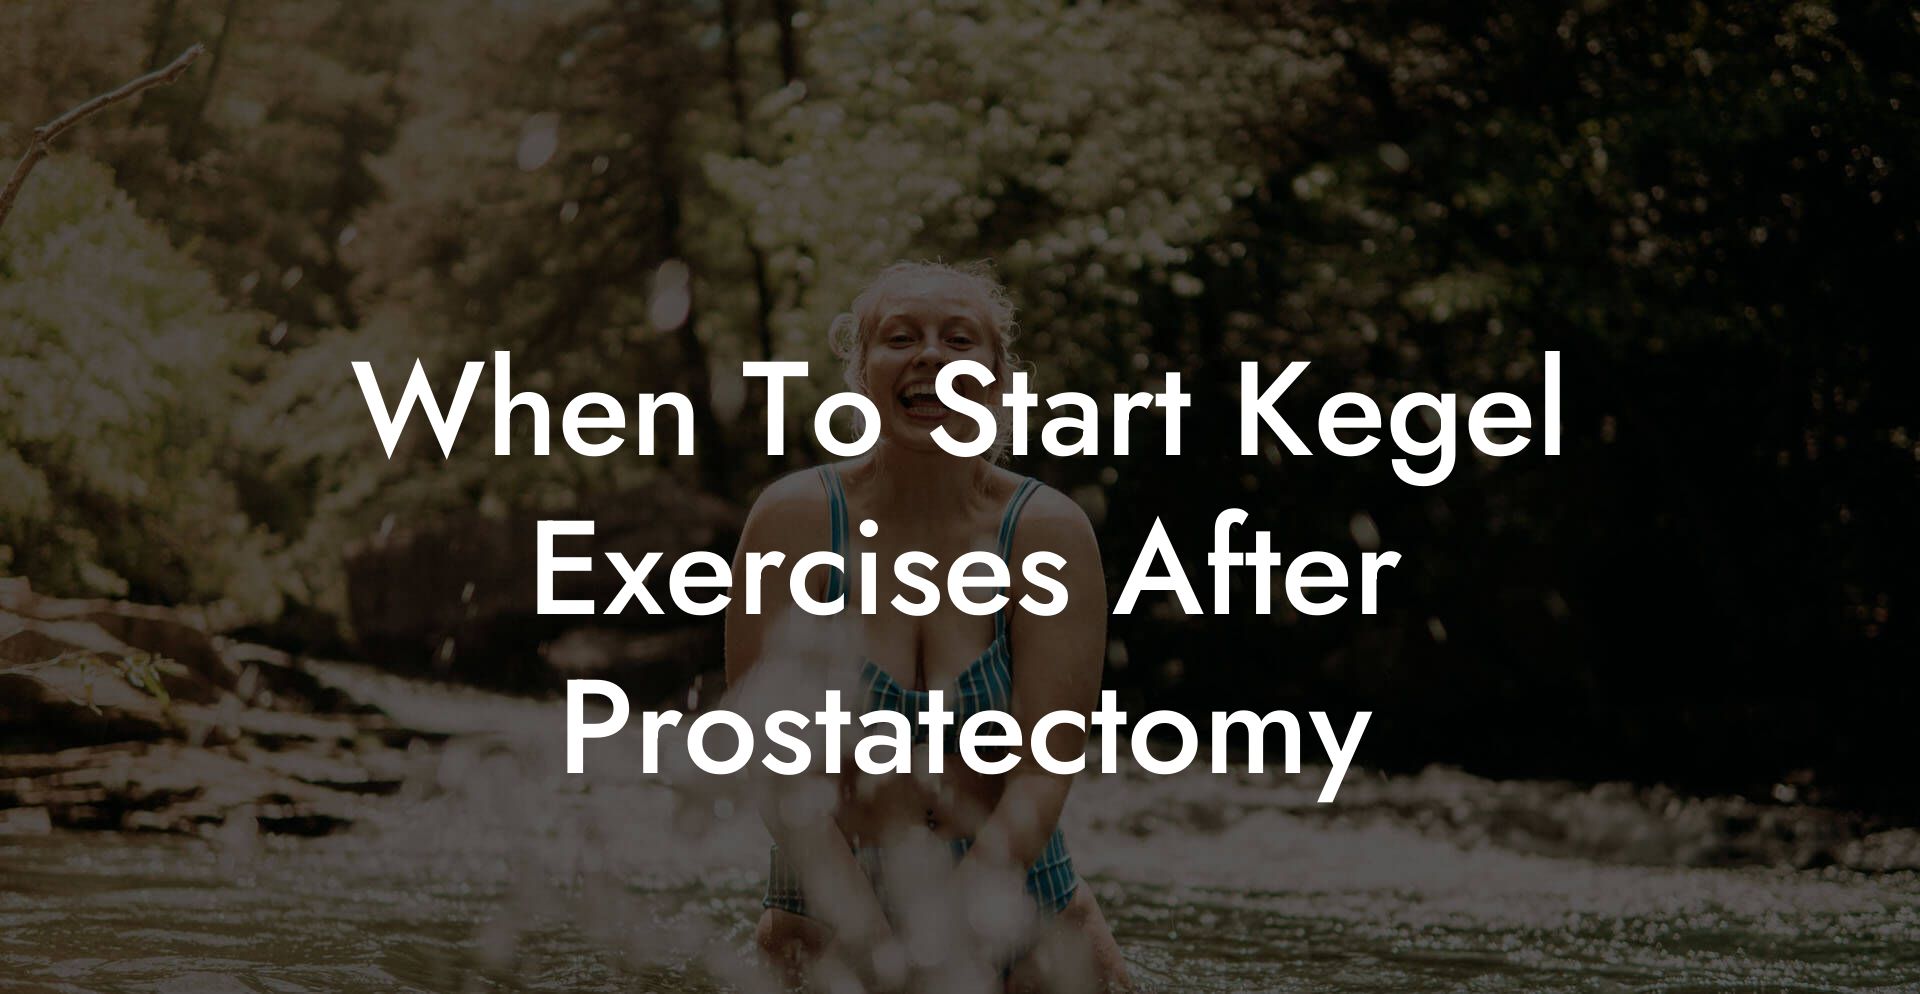 When To Start Kegel Exercises After Prostatectomy